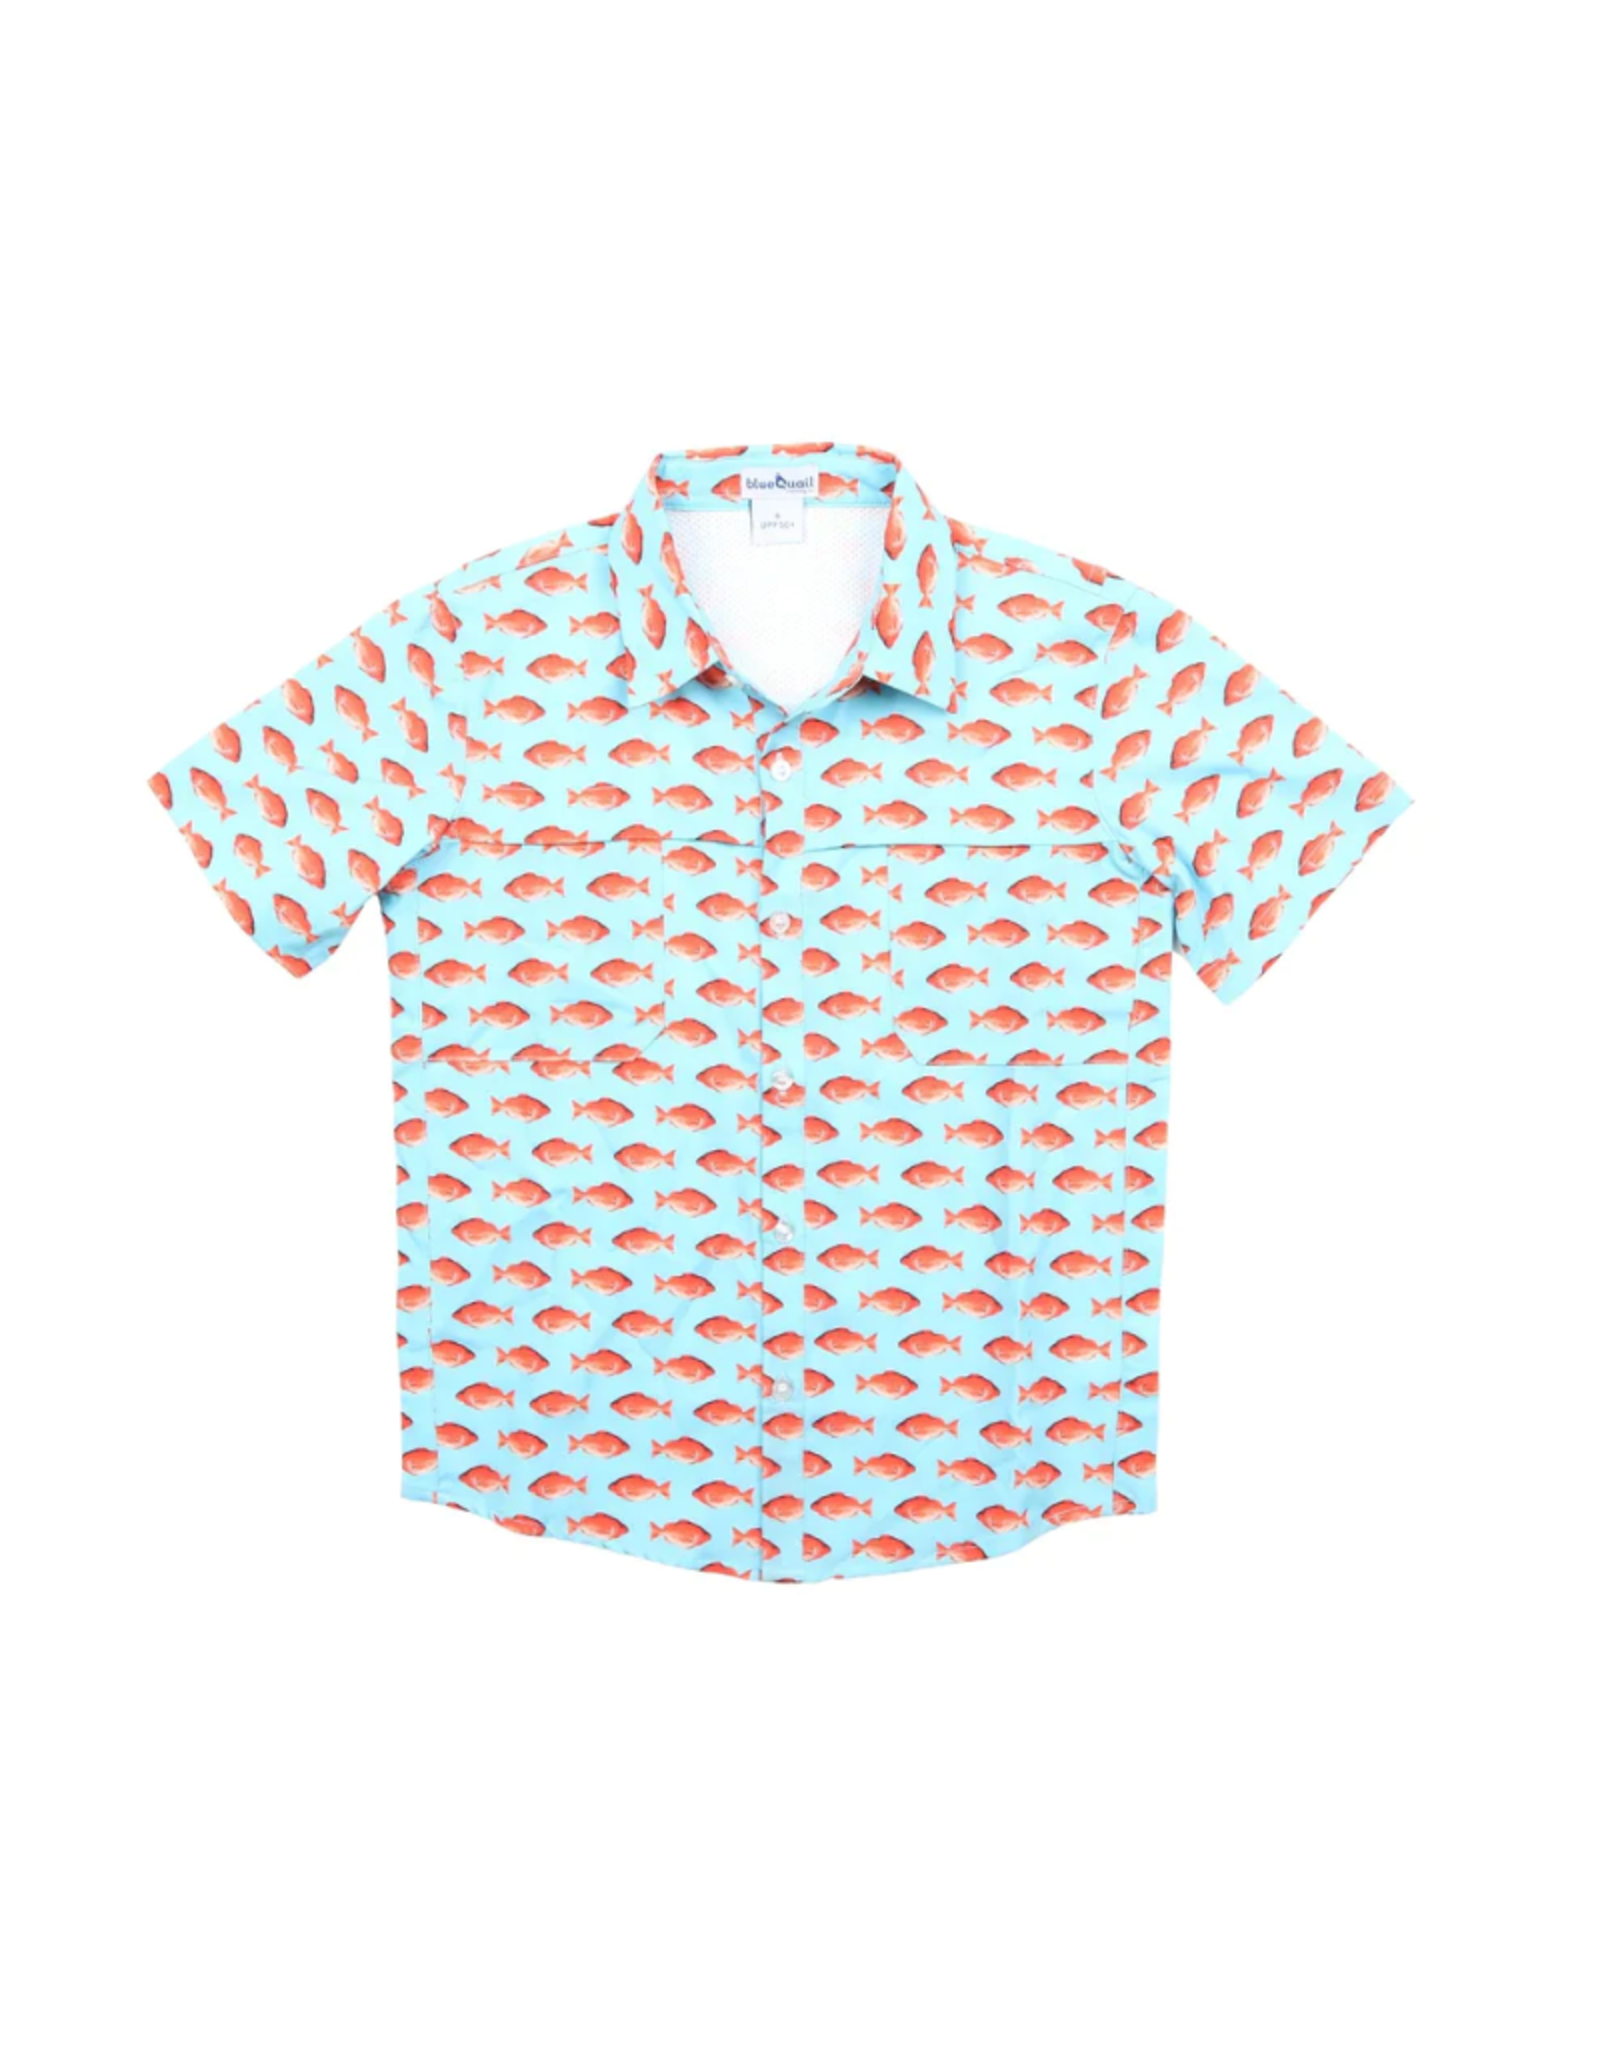 BlueQuail Clothing Co. Red Snapper Short Sleeve Shirt